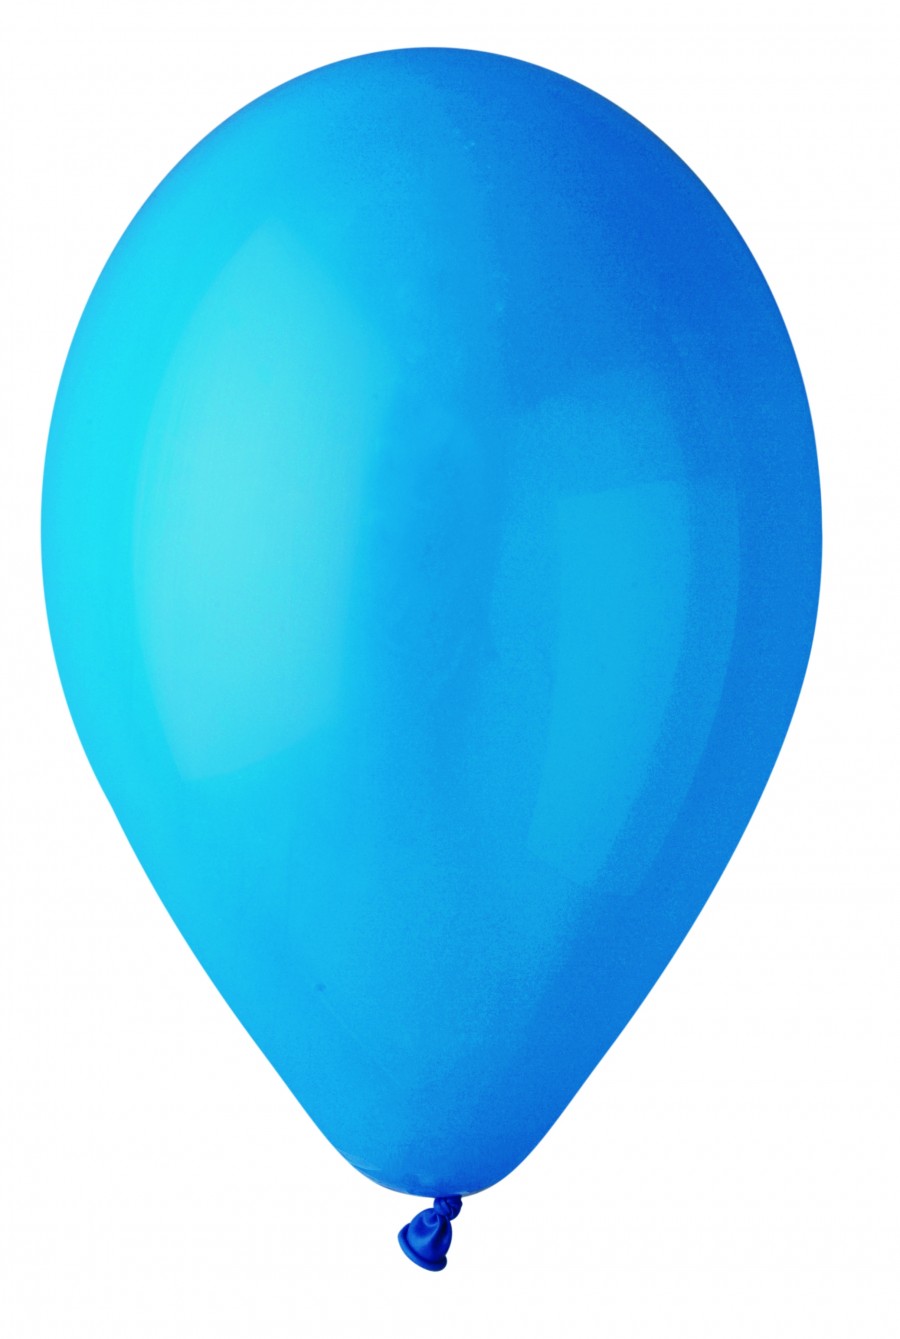 10 Inch Balloon, Printed 1 Colour, 1 Side